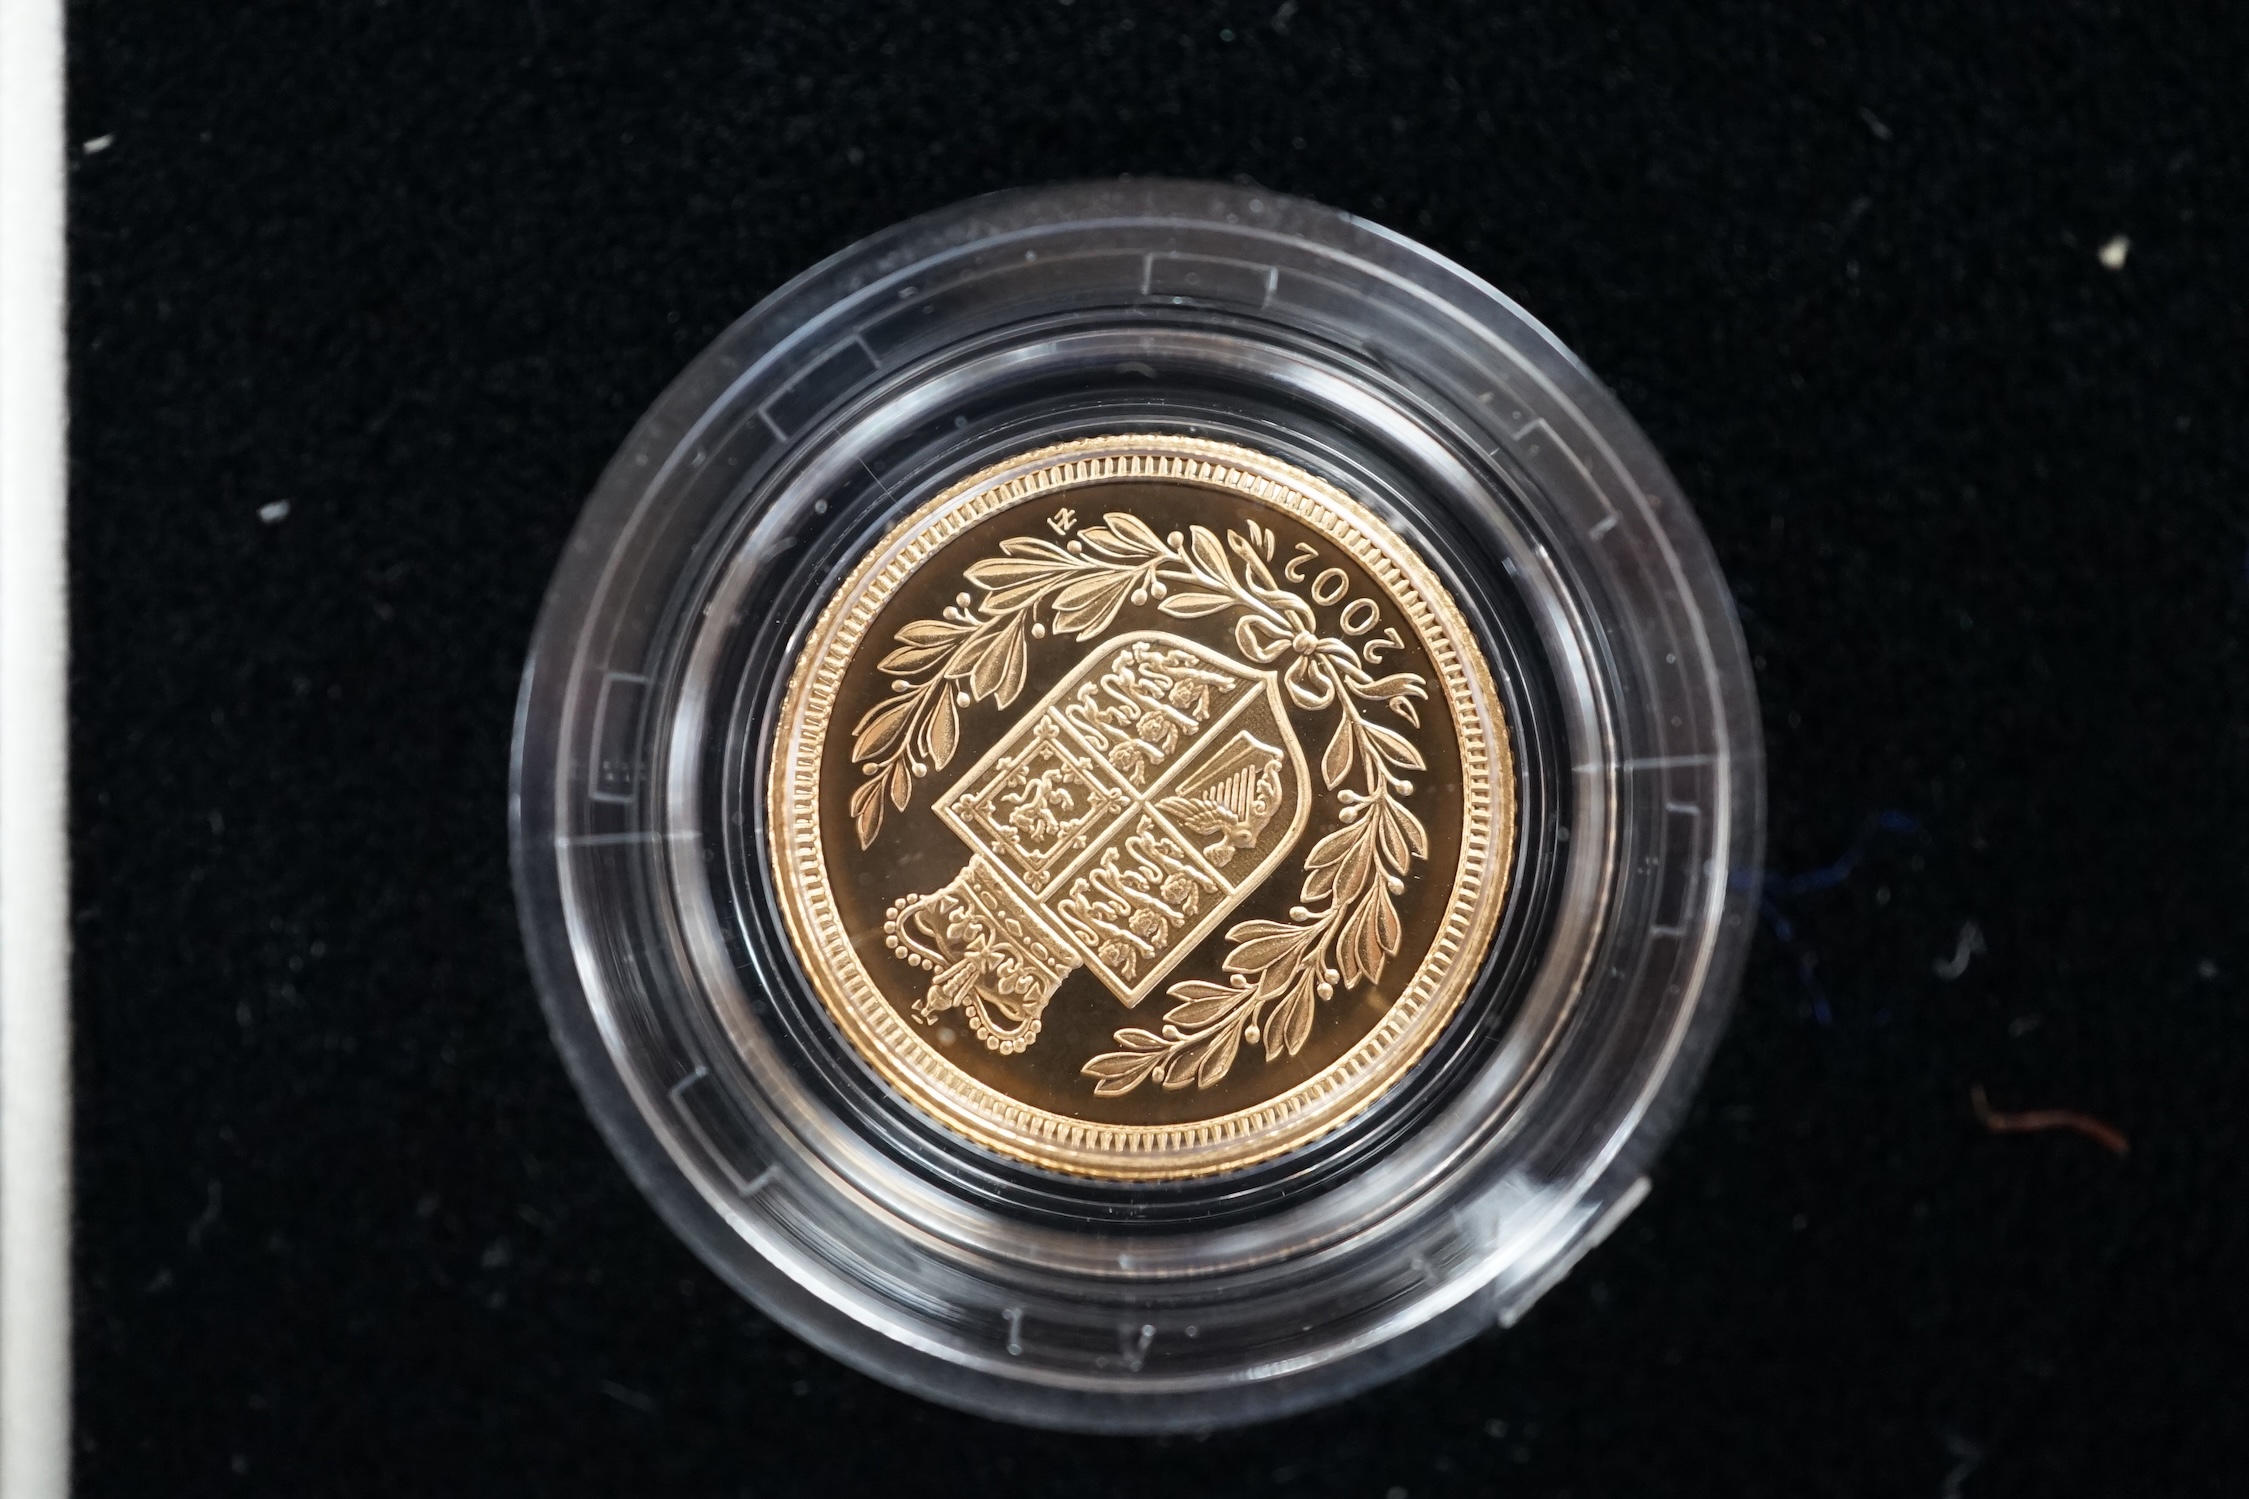 A cased 2002 United Kingdom gold proof sovereign three coin collection, with certificate. - Image 2 of 5